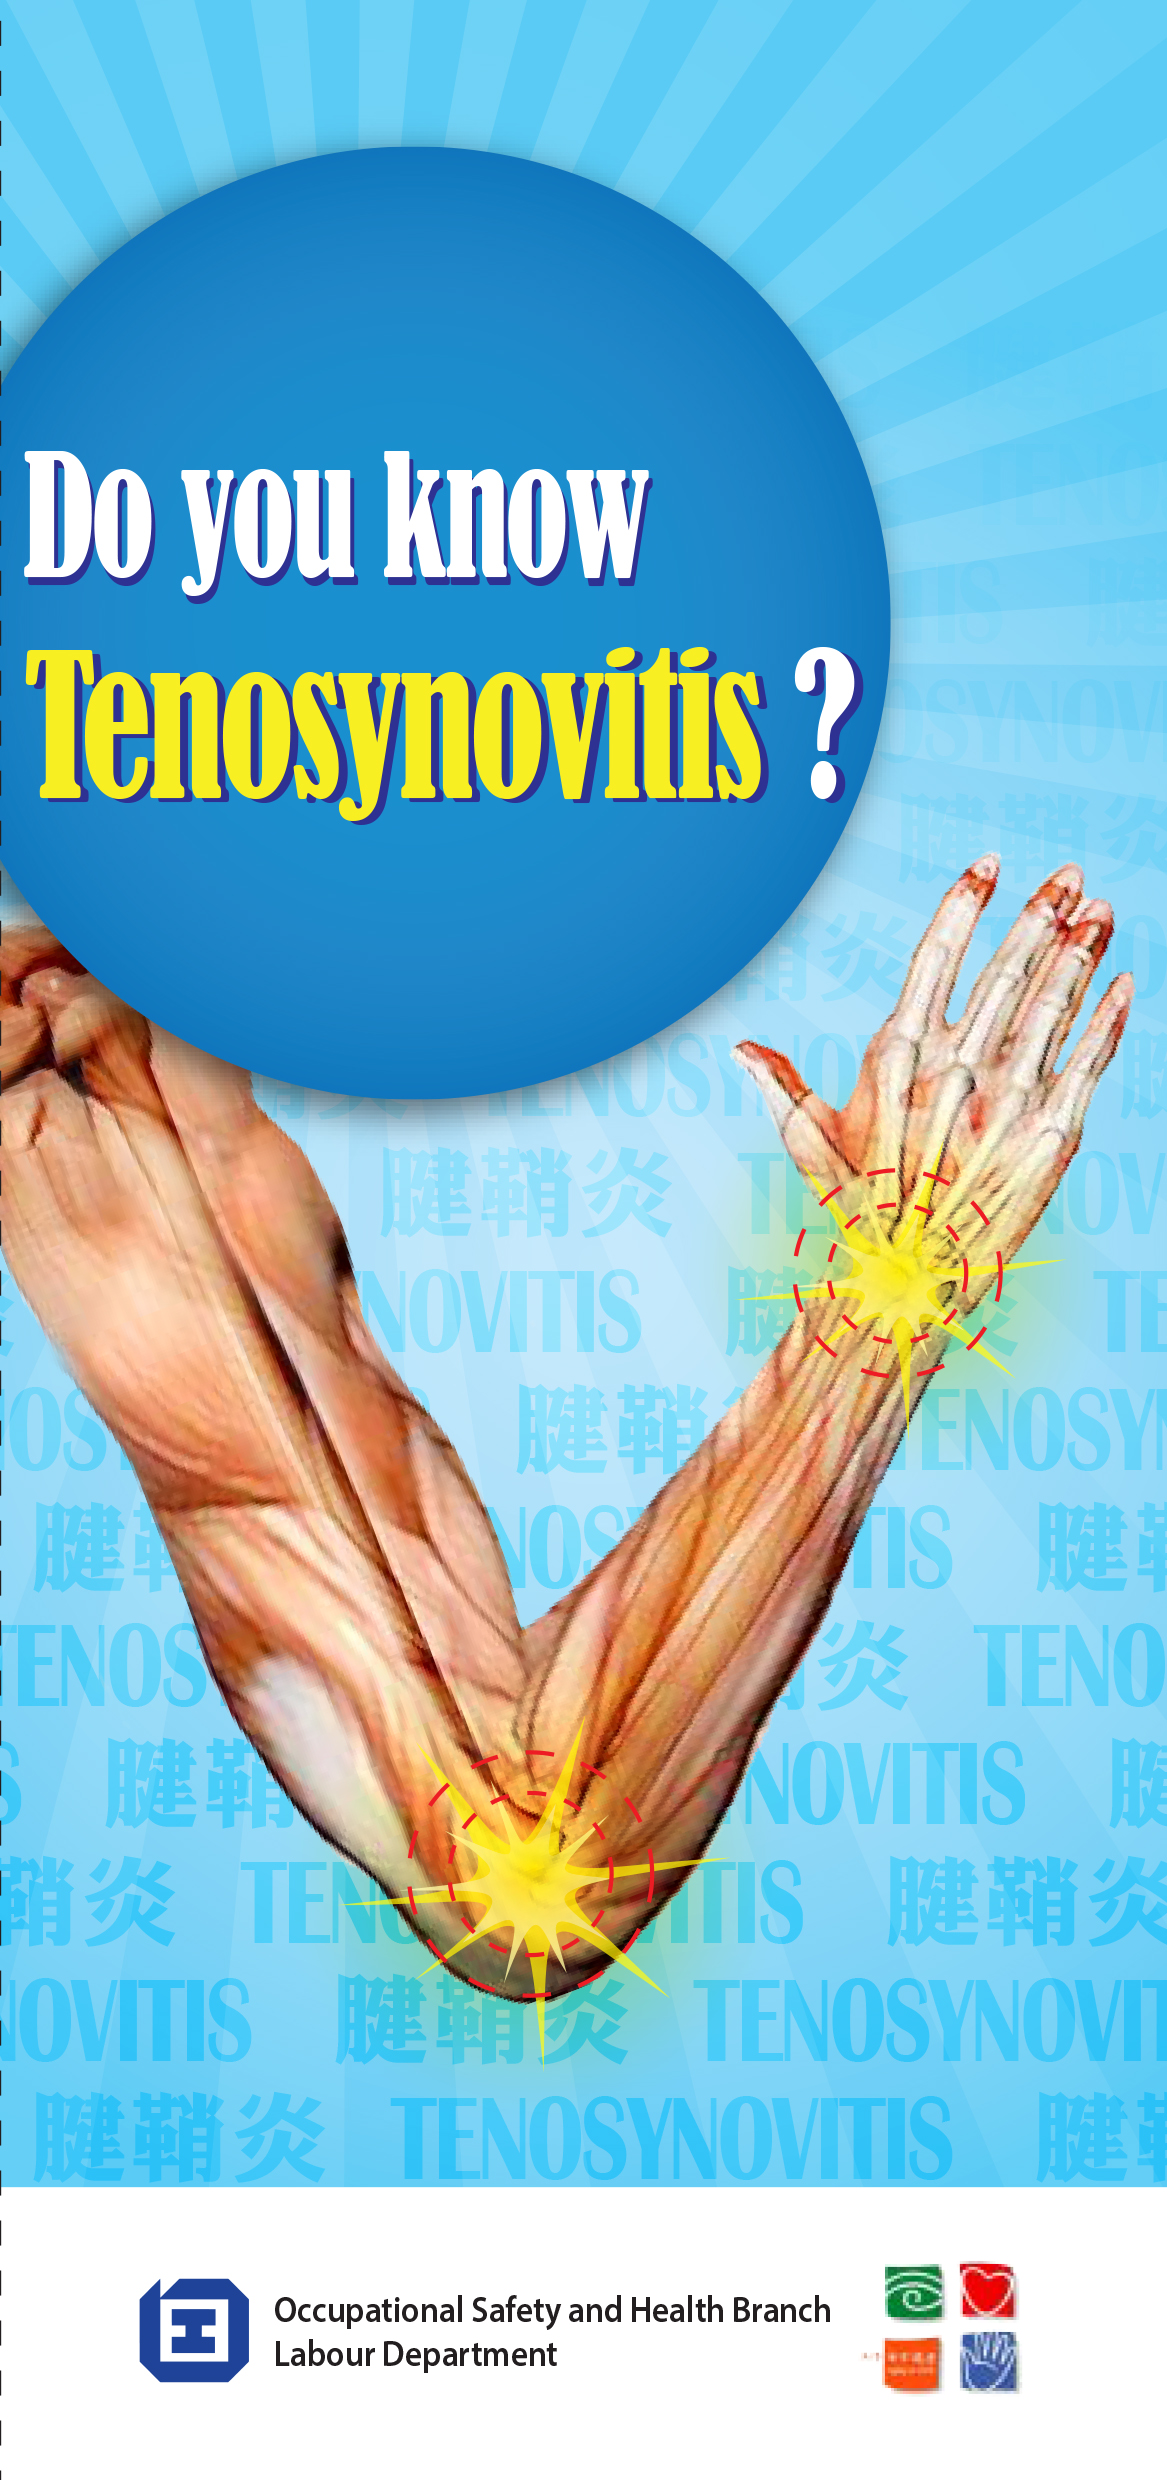 Do you know tenosynovitis? (published by the Labour Department)